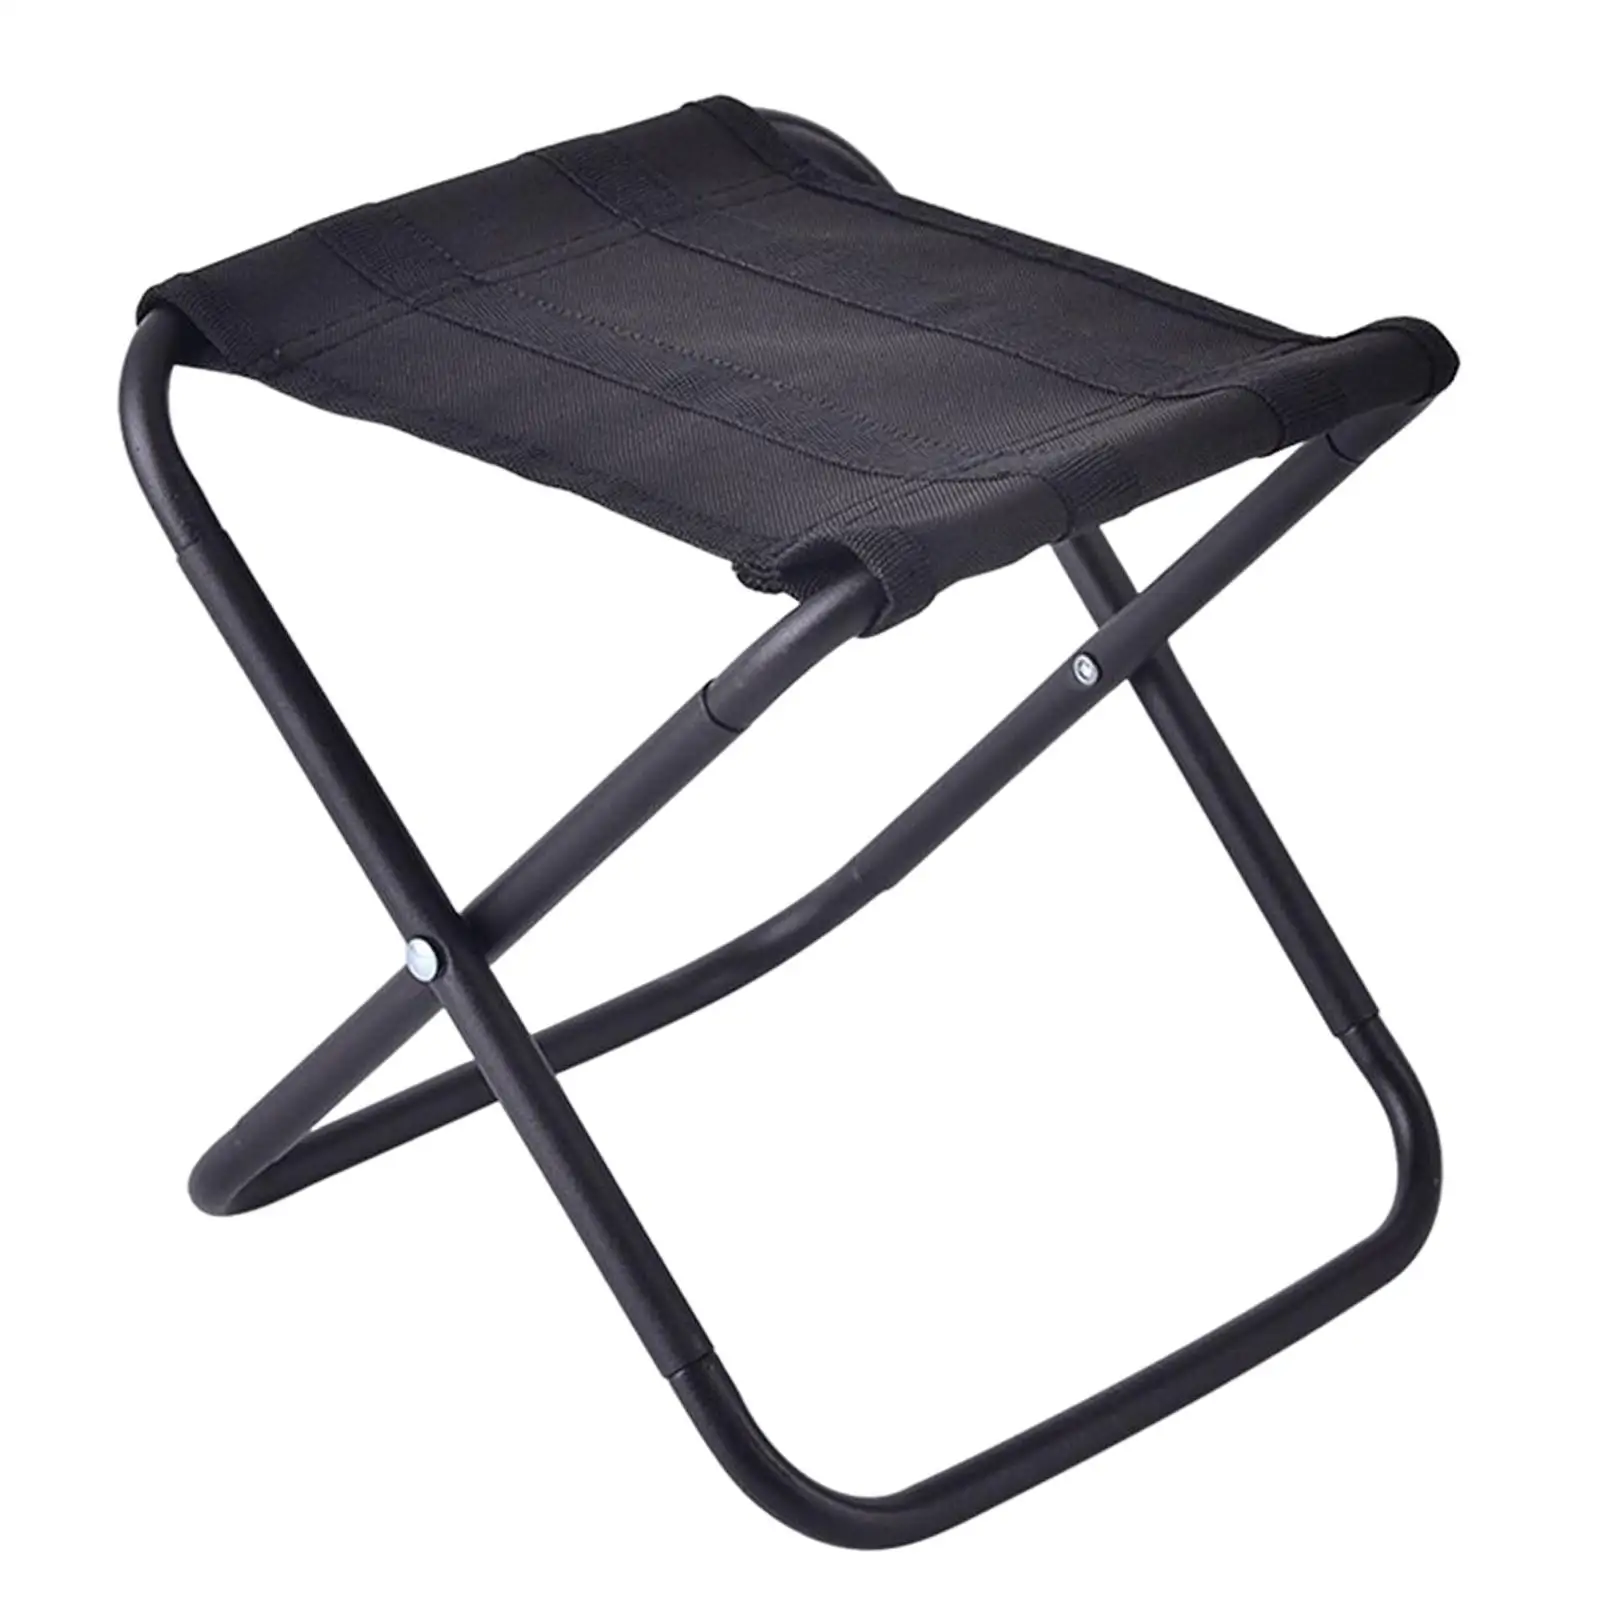 Camp Stool Fishing Chair Footrest Seat for Backpacking Walking Hiking Travel